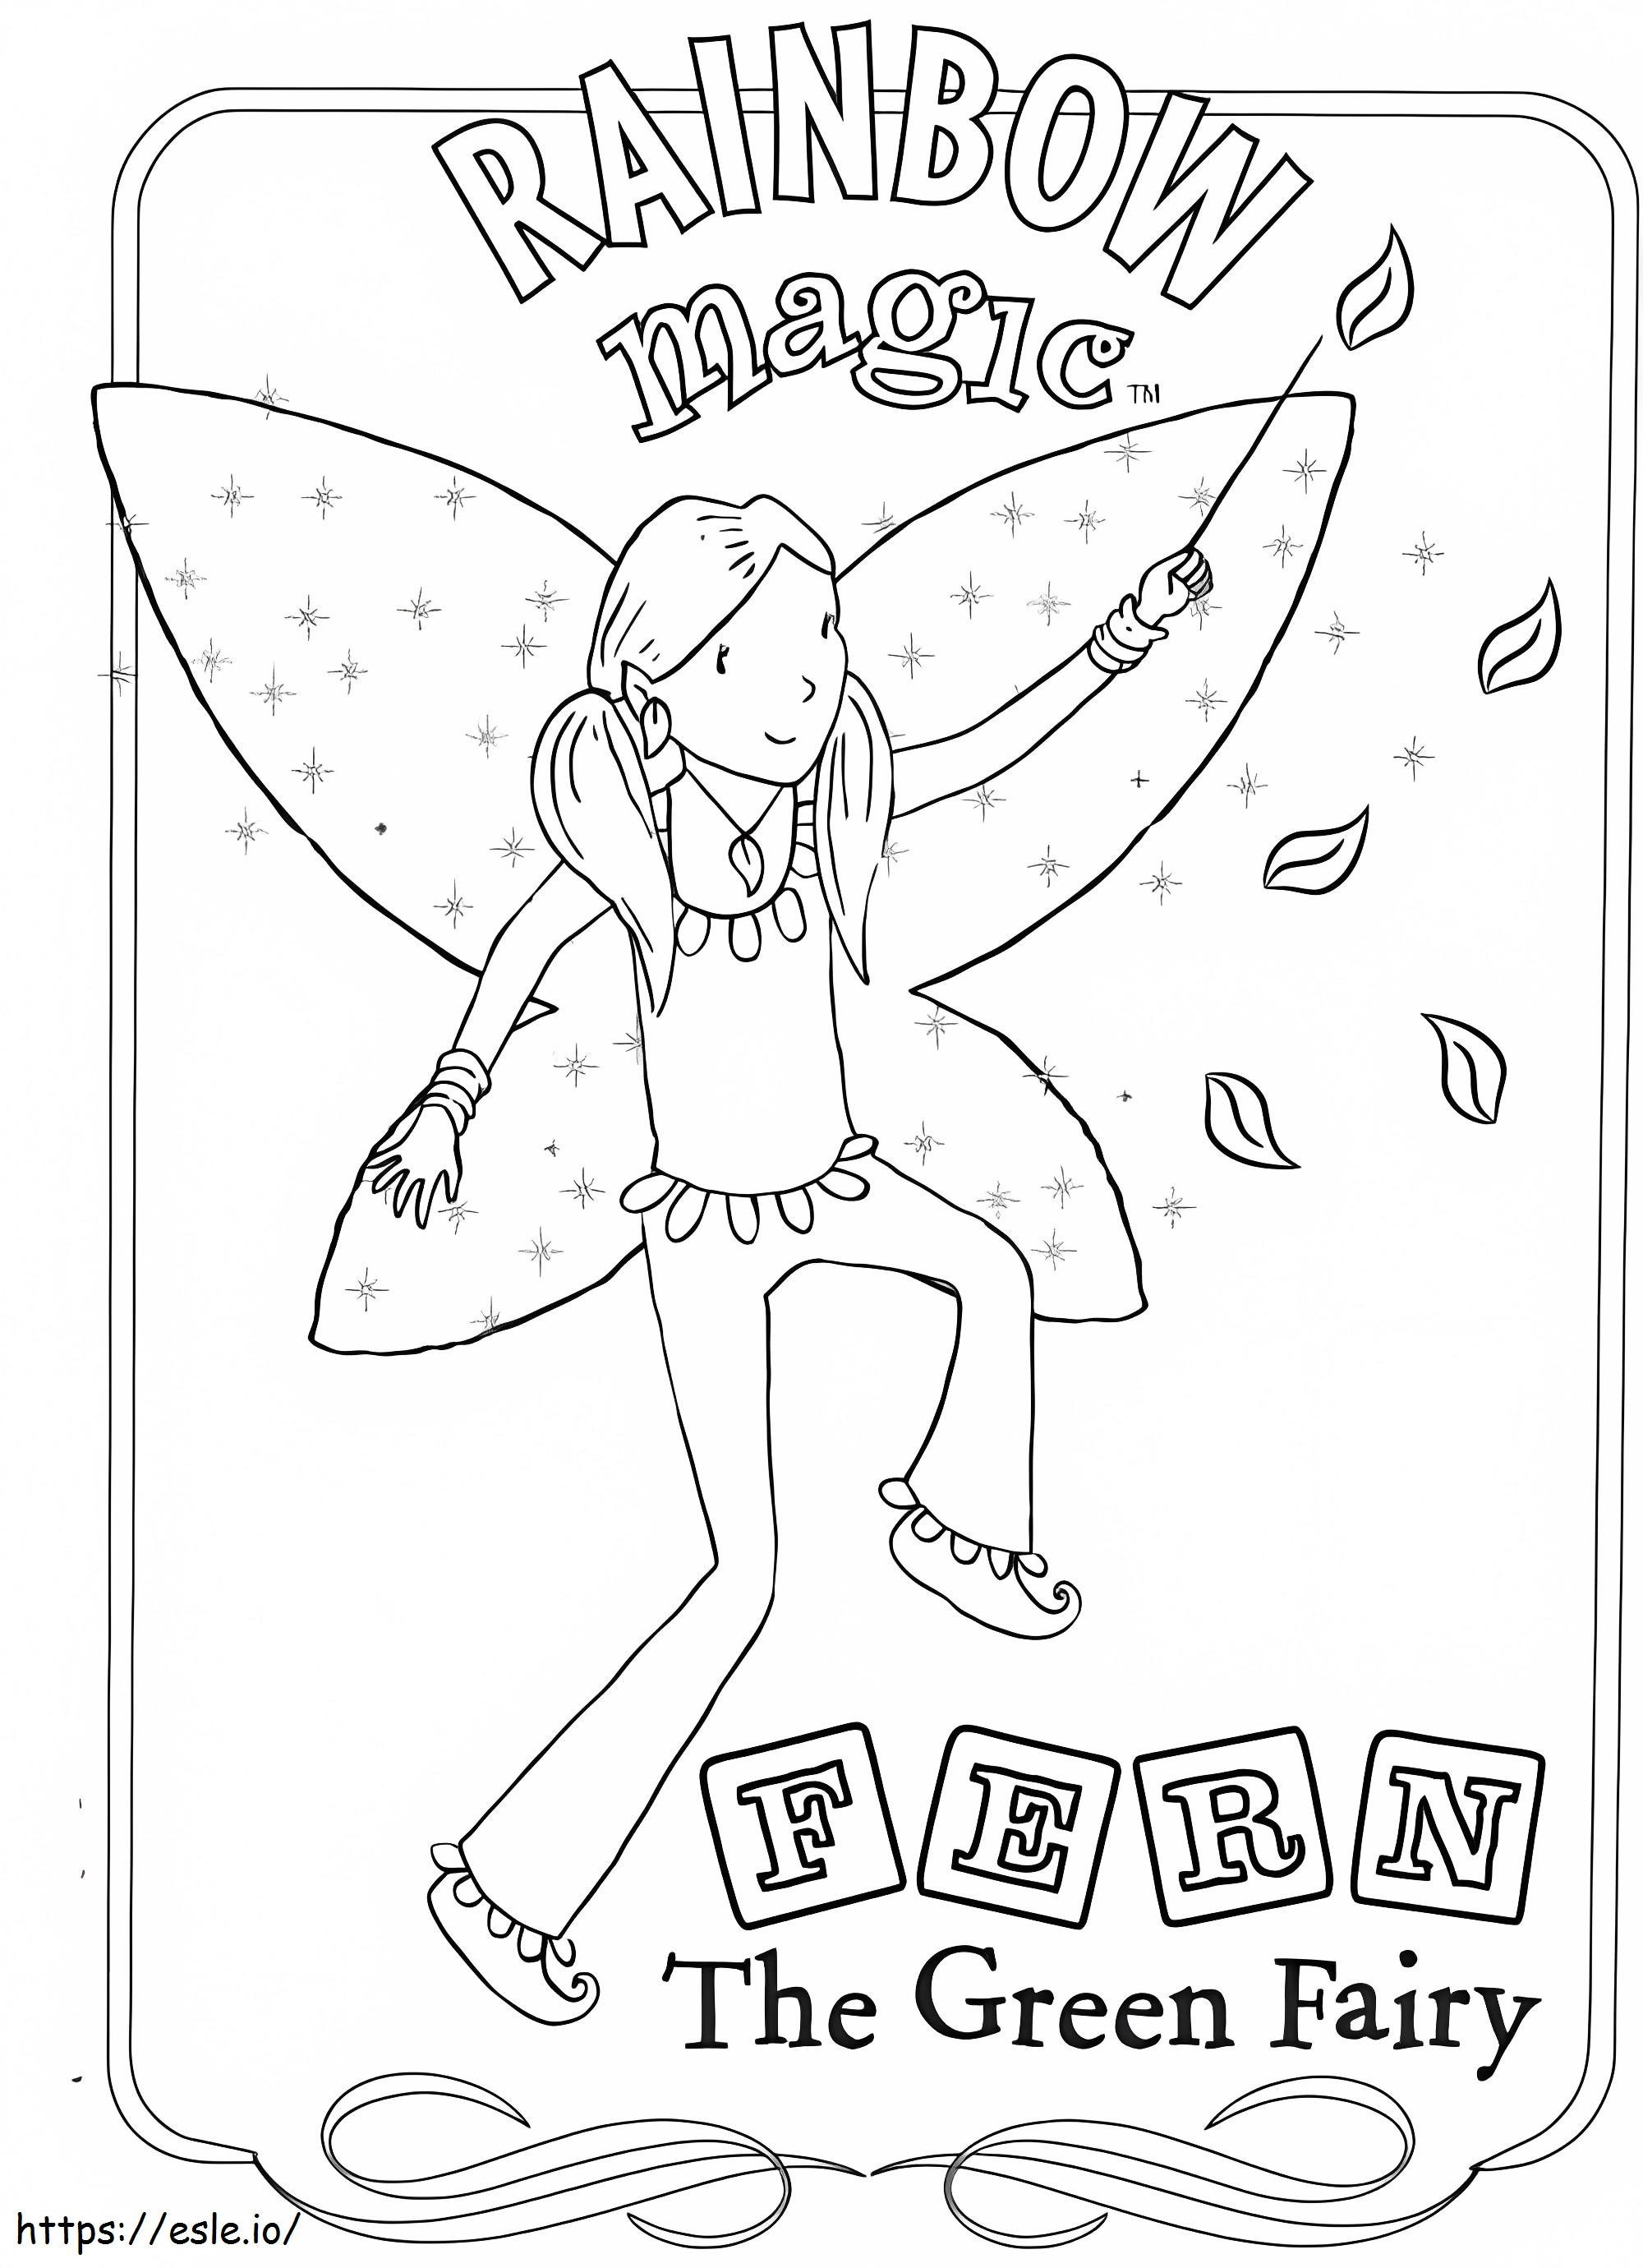 Fern The Green Fairy coloring page